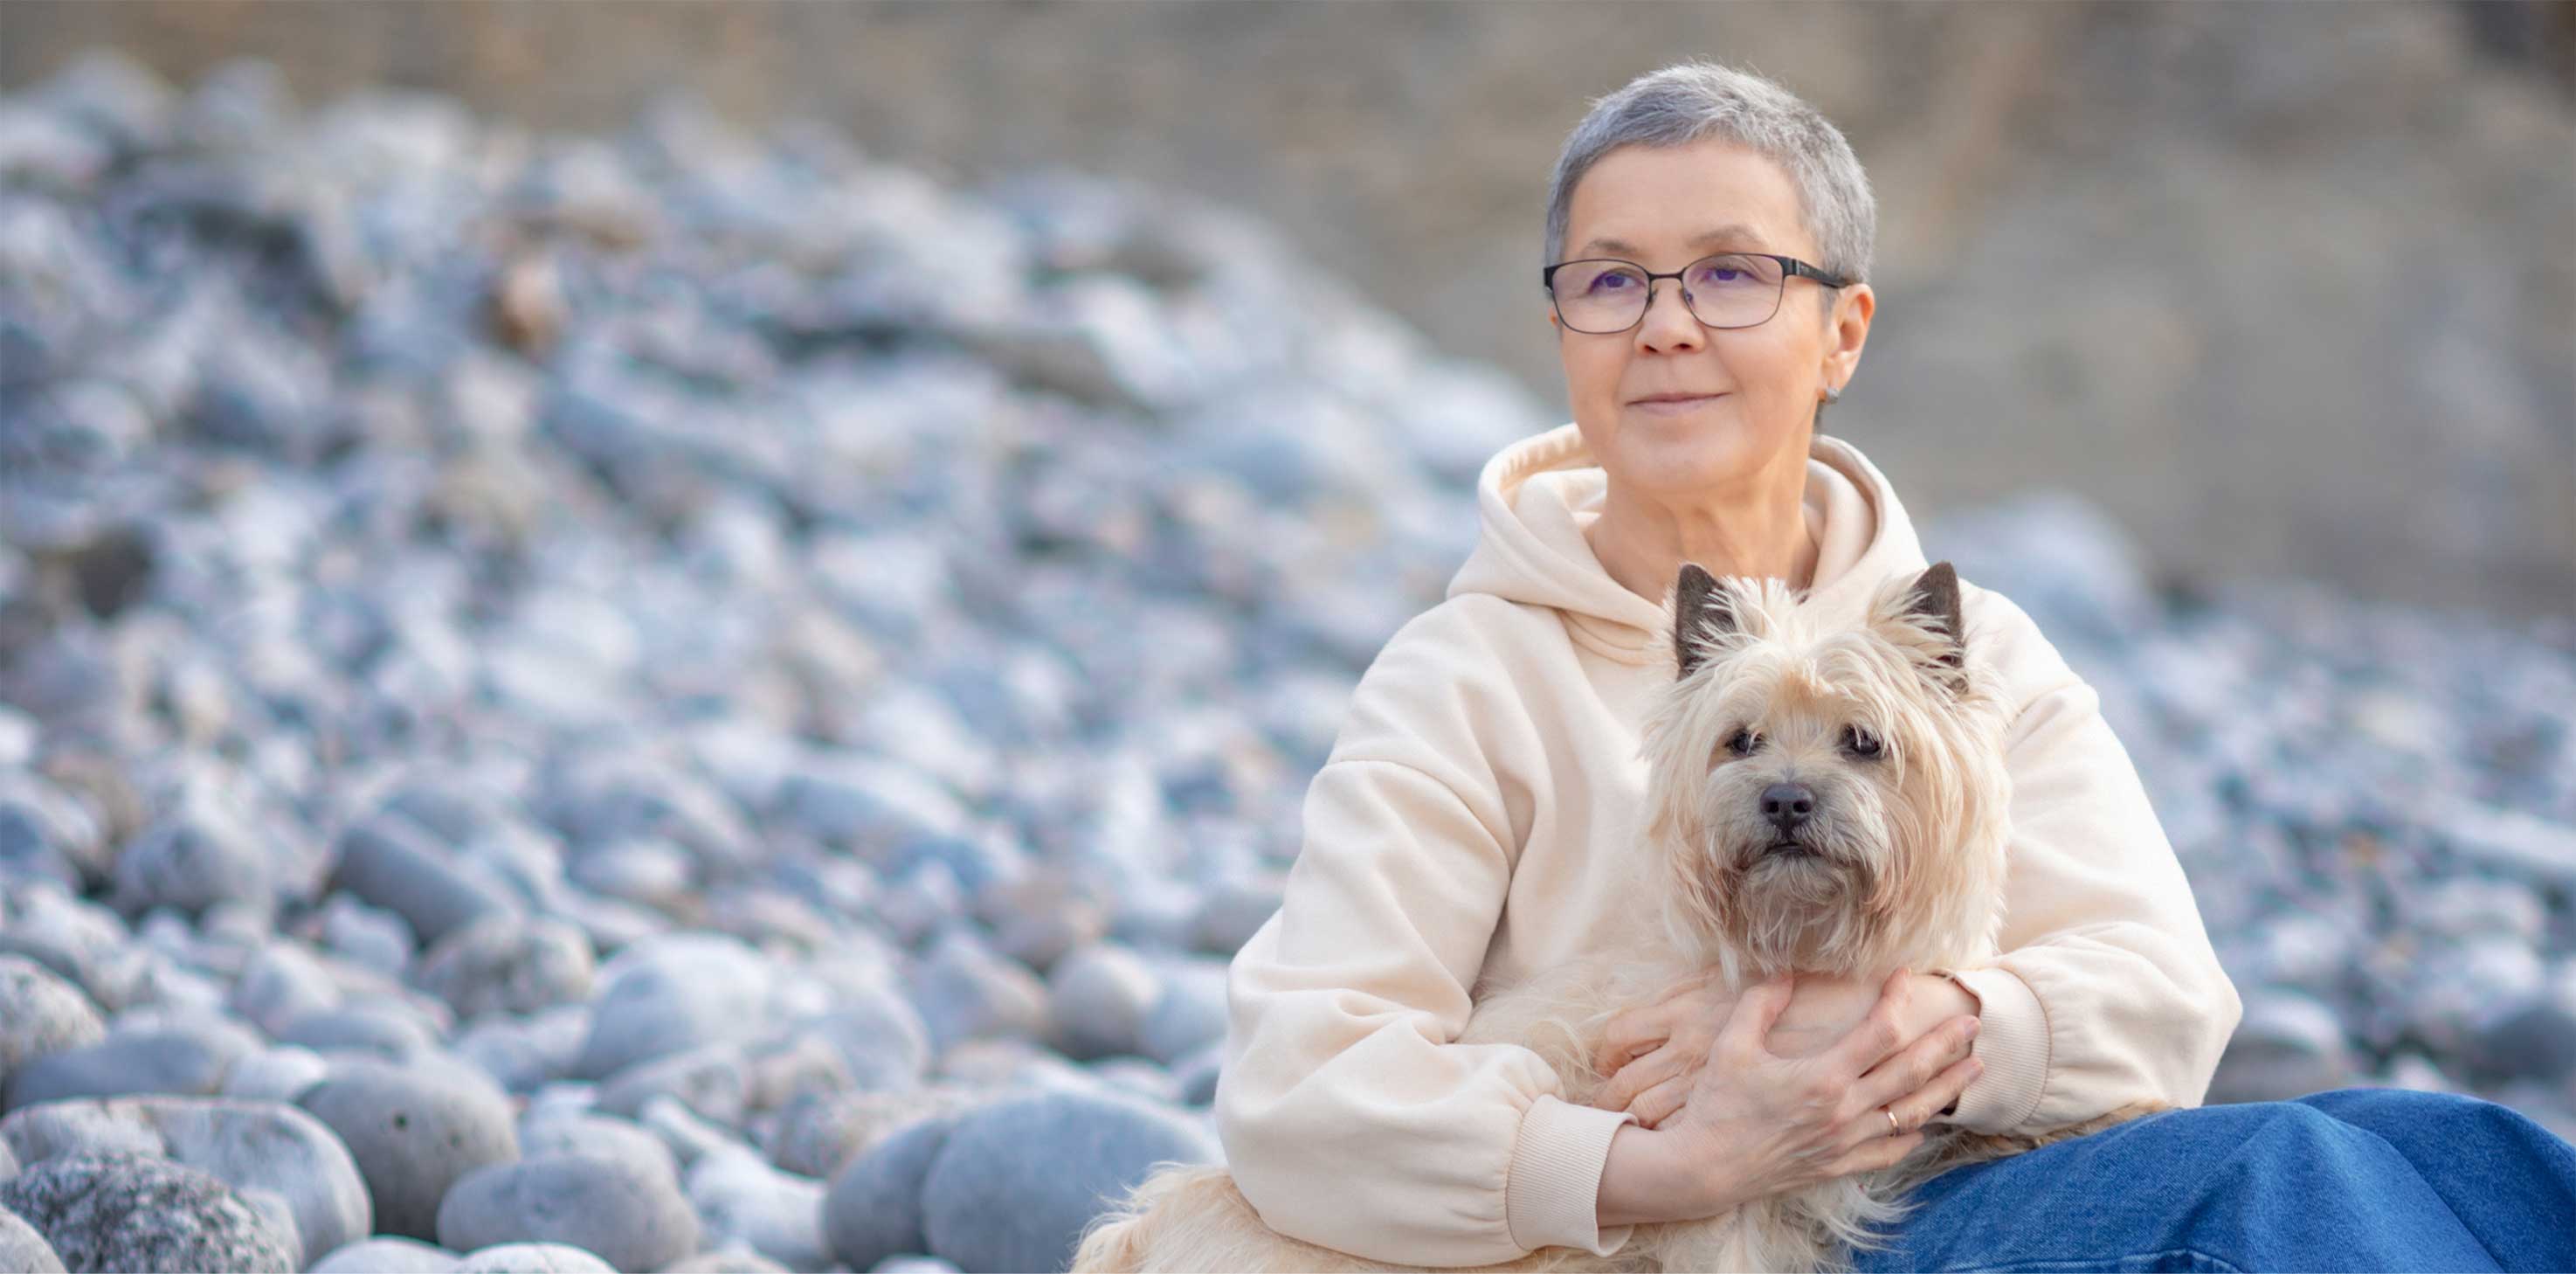 A middle aged Asian woman with grey hair sits on a pebbly beach shore with her dog in her lap. She gazes off into the distance.